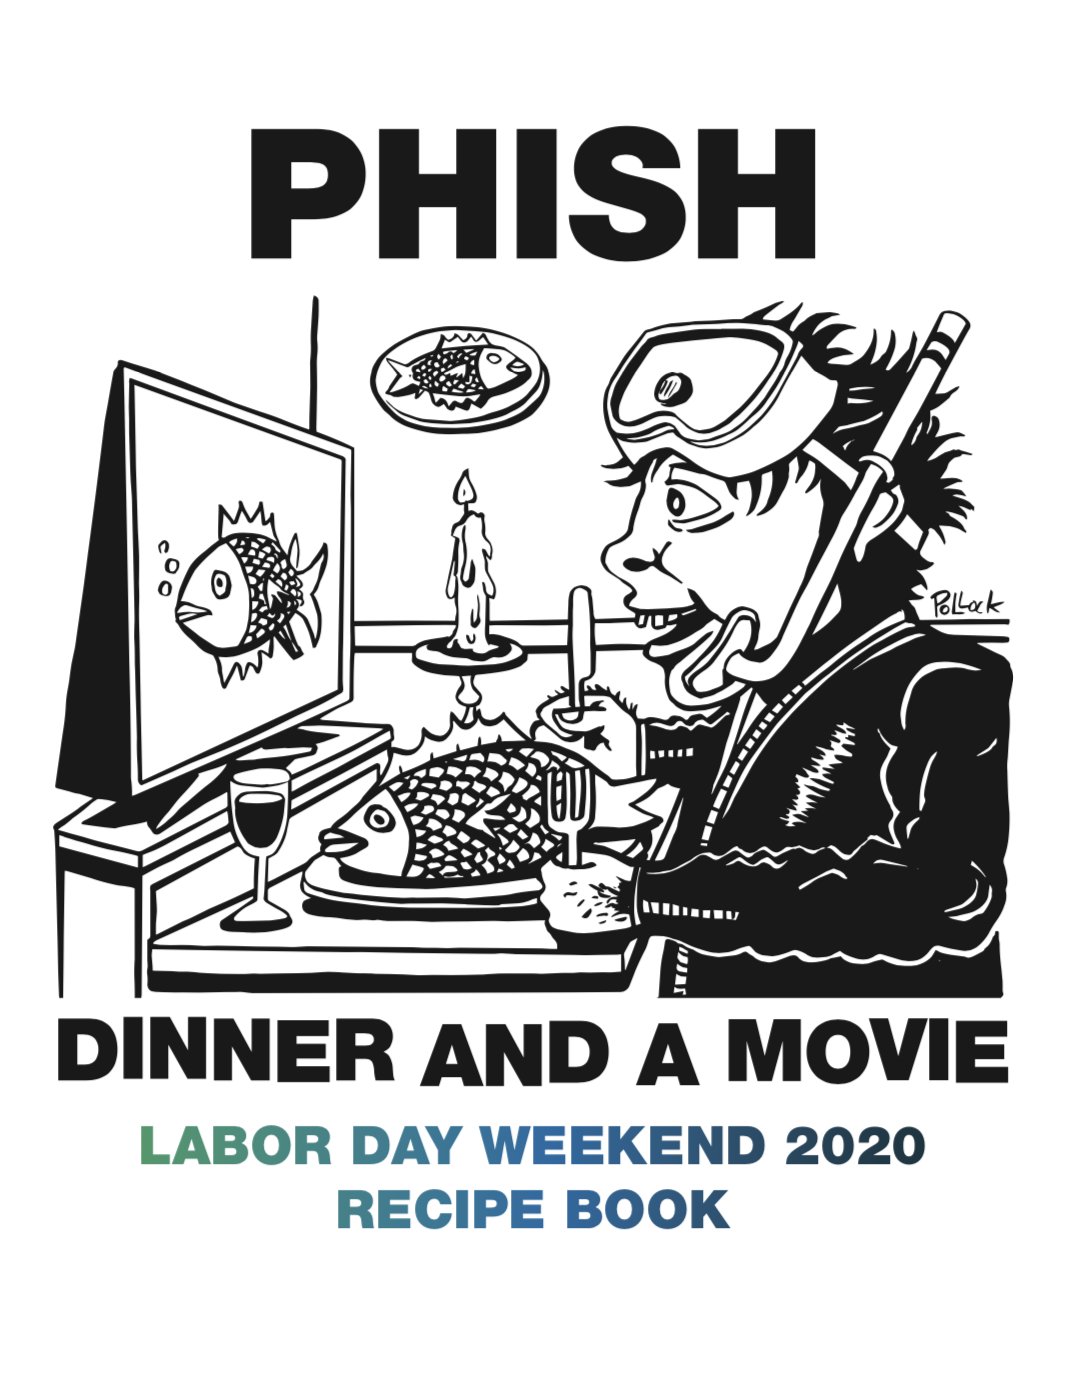 phish dinner and a movie recipes